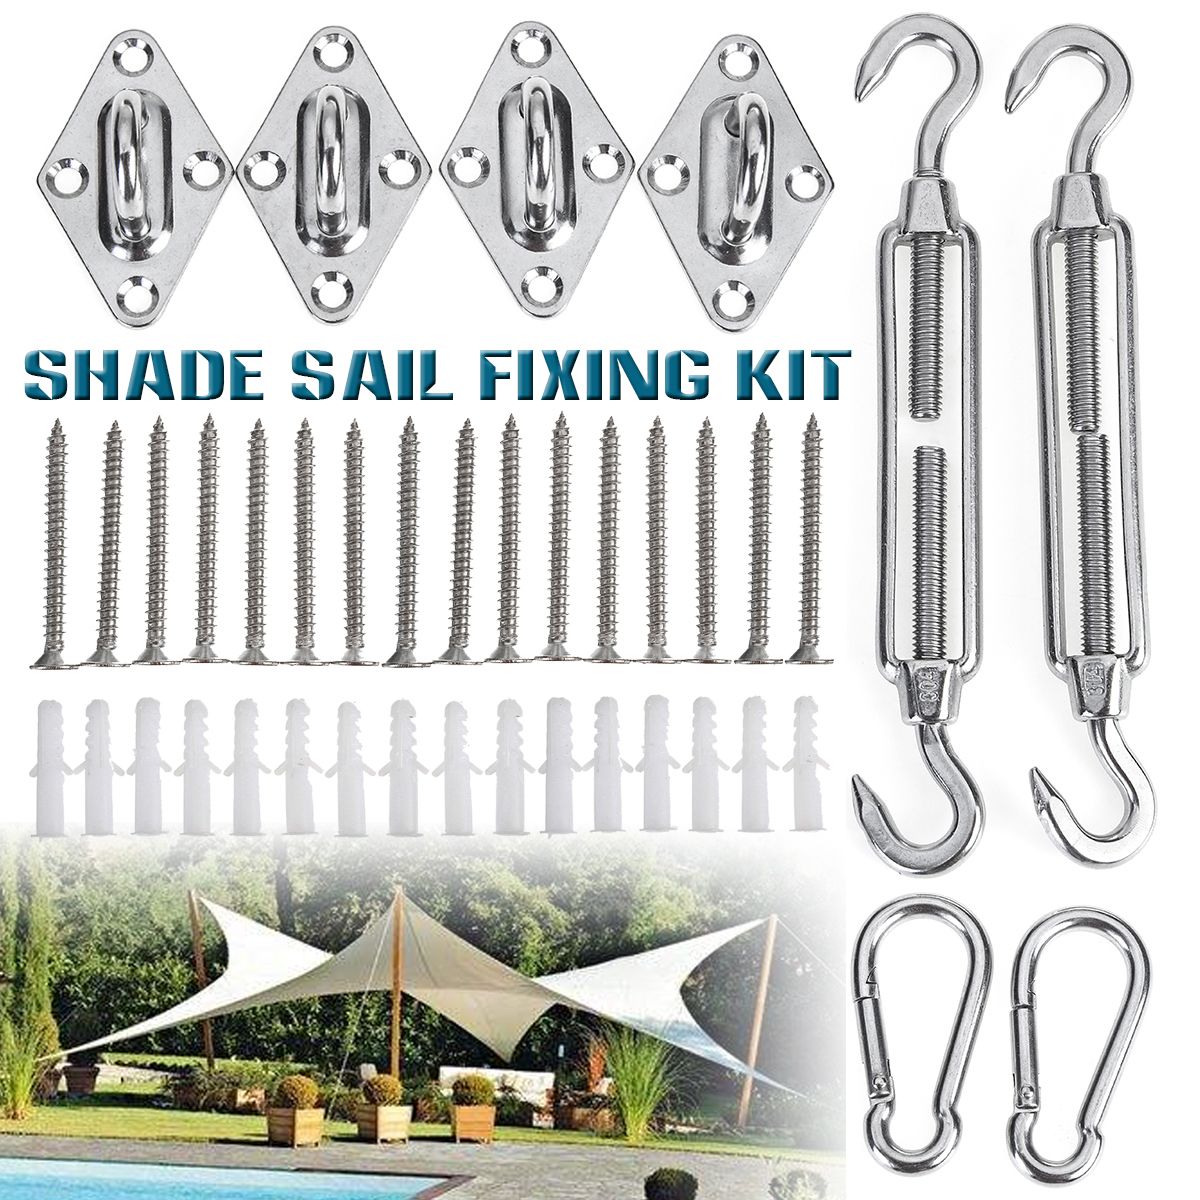 8Pcs-Stainless-Steel-Shade-Canopy-Sun-Sail-Fixing-Fittings-Hardware-Accessory-1702656